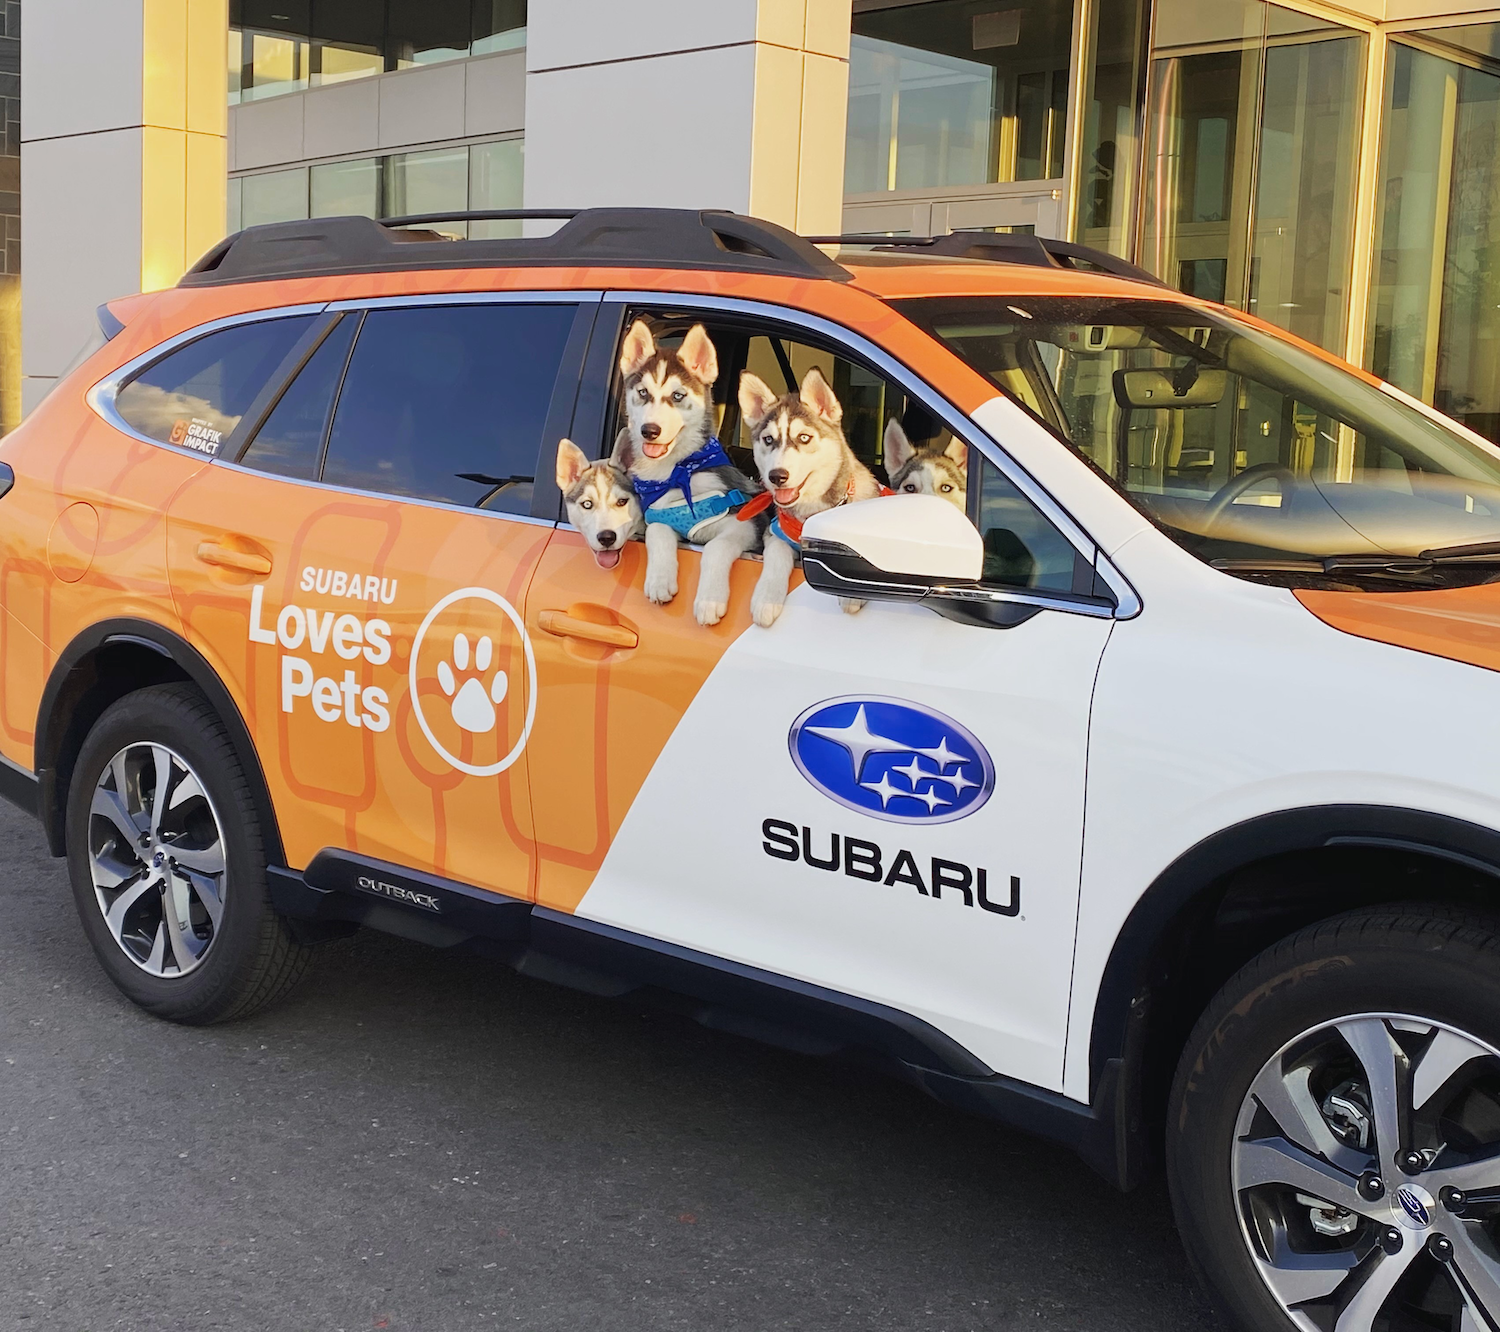 Subaru of Las Vegas supports nonprofit that provides therapy dogs